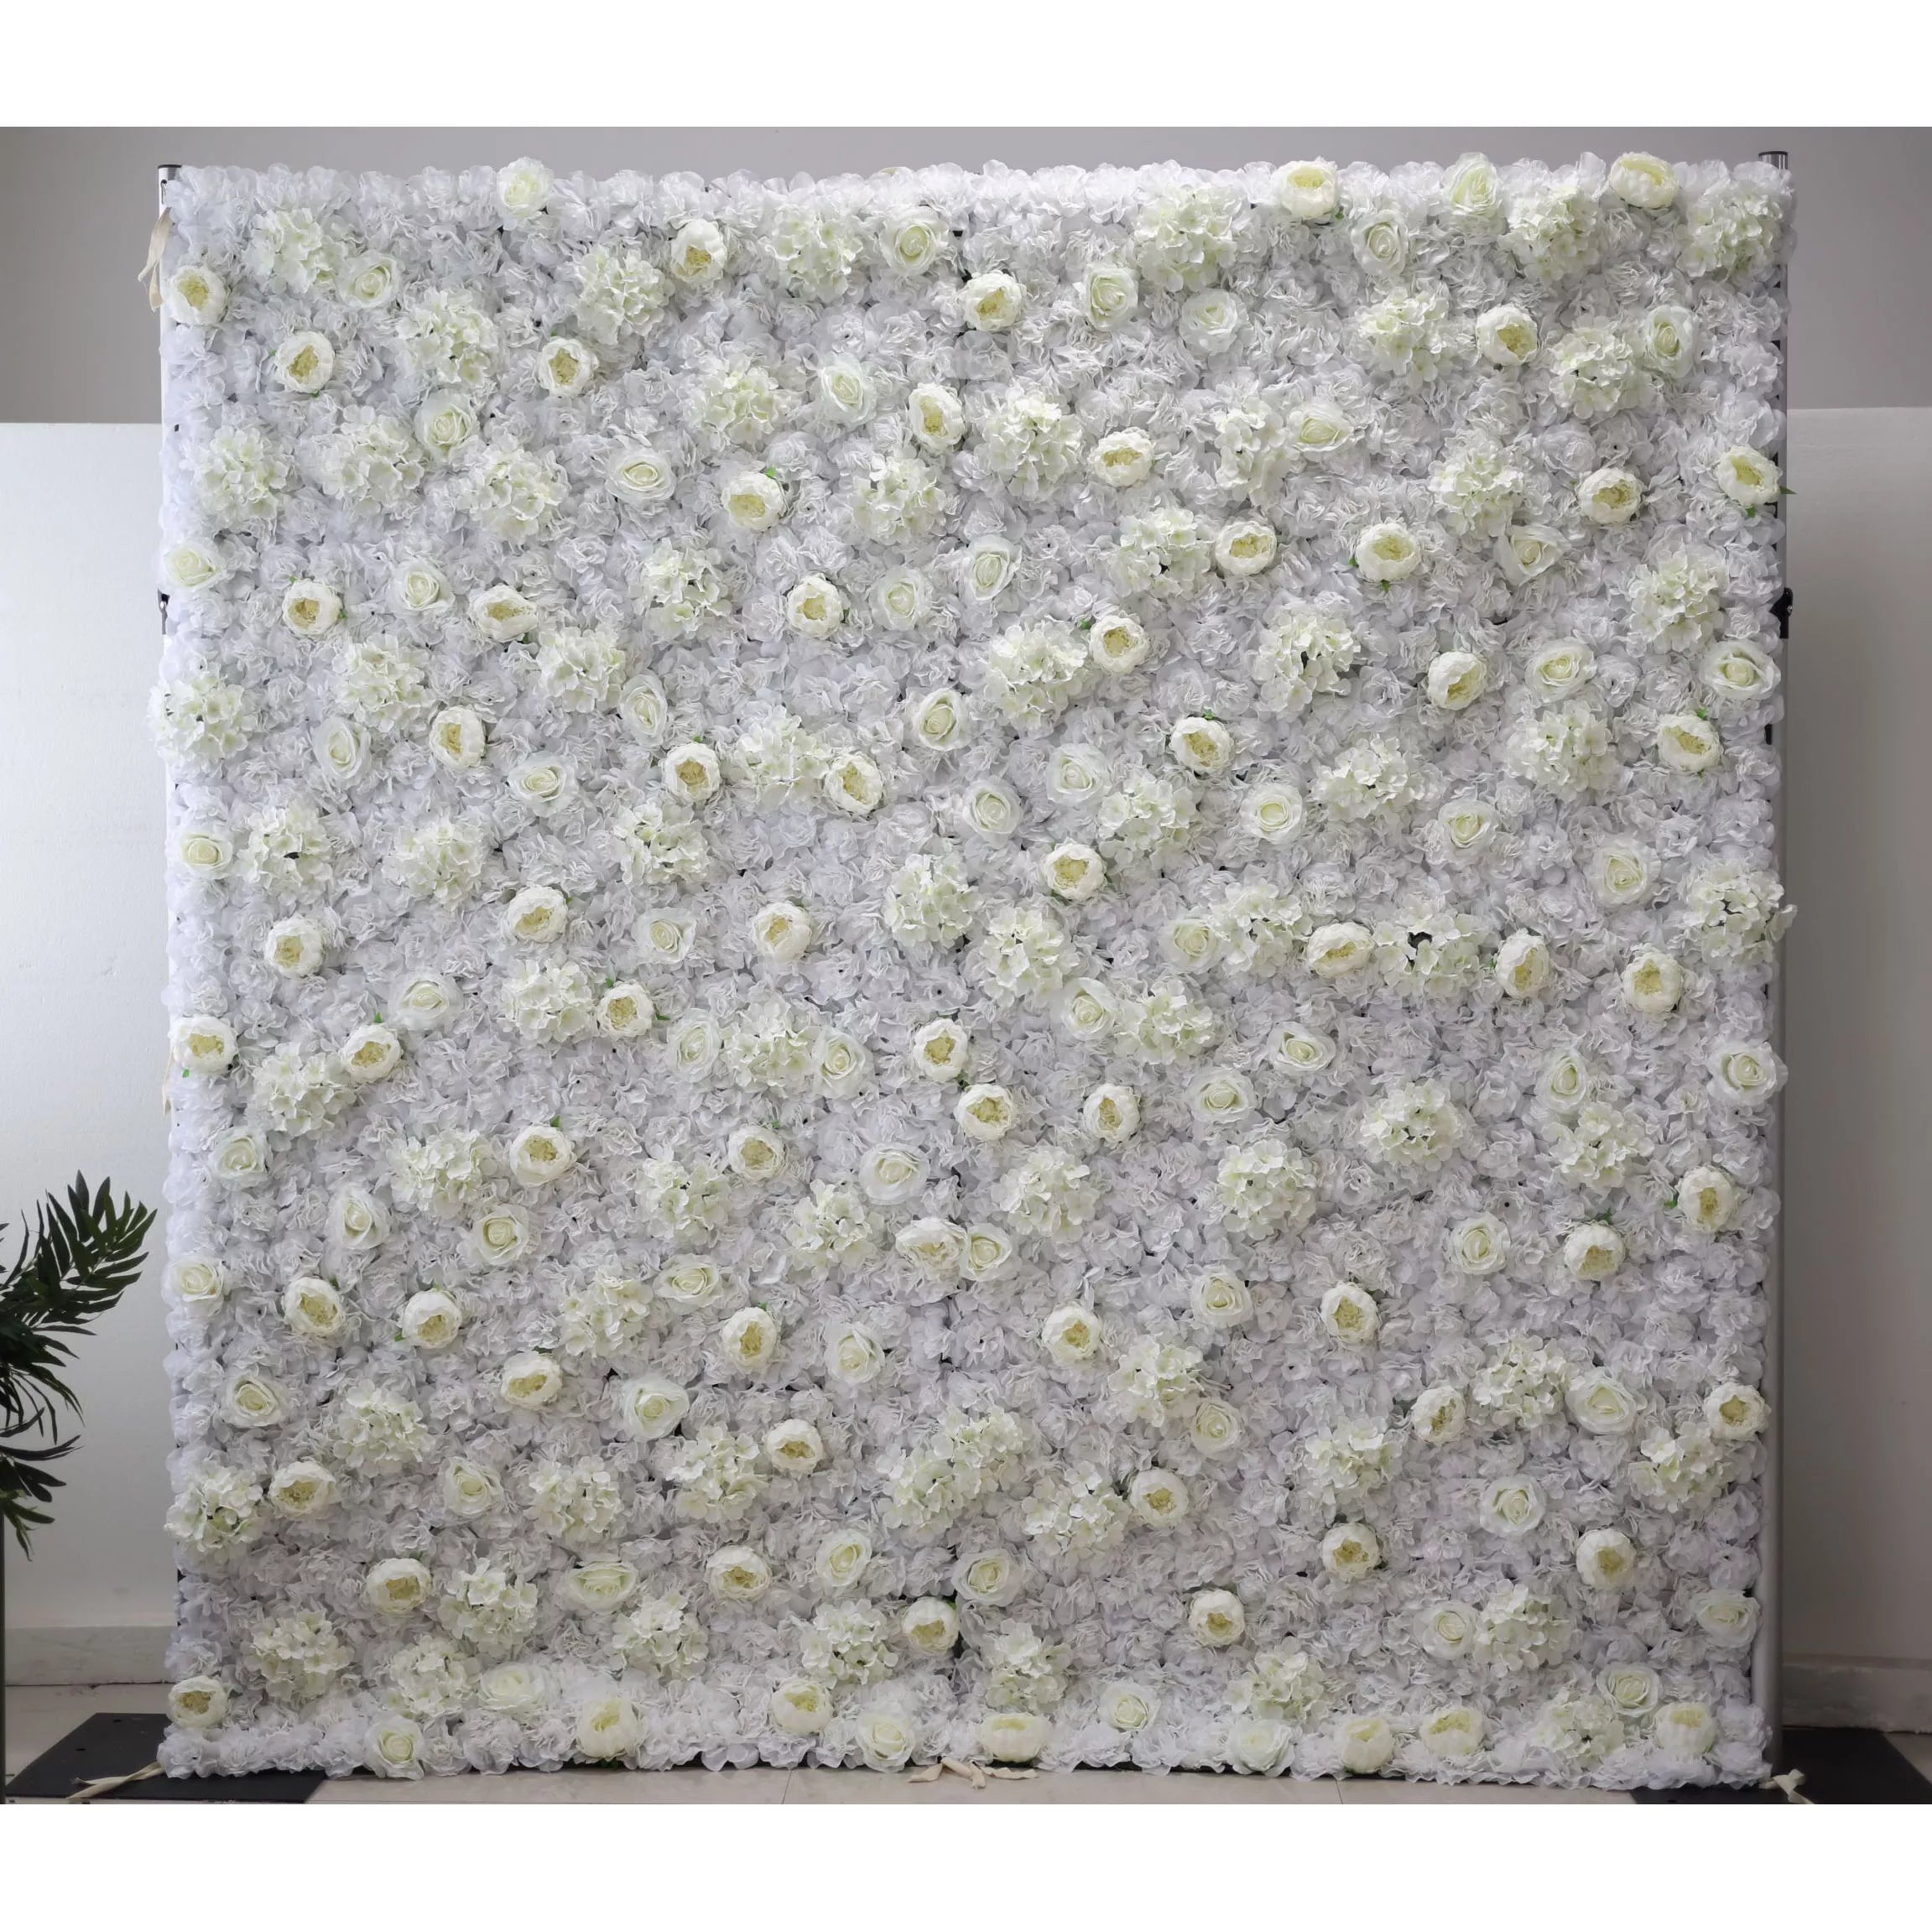 Valar Flowers Roll Up Fabric Artificial White Flower Wall Wedding Backdrop, Floral Party Decor, Event Photography-VF-006